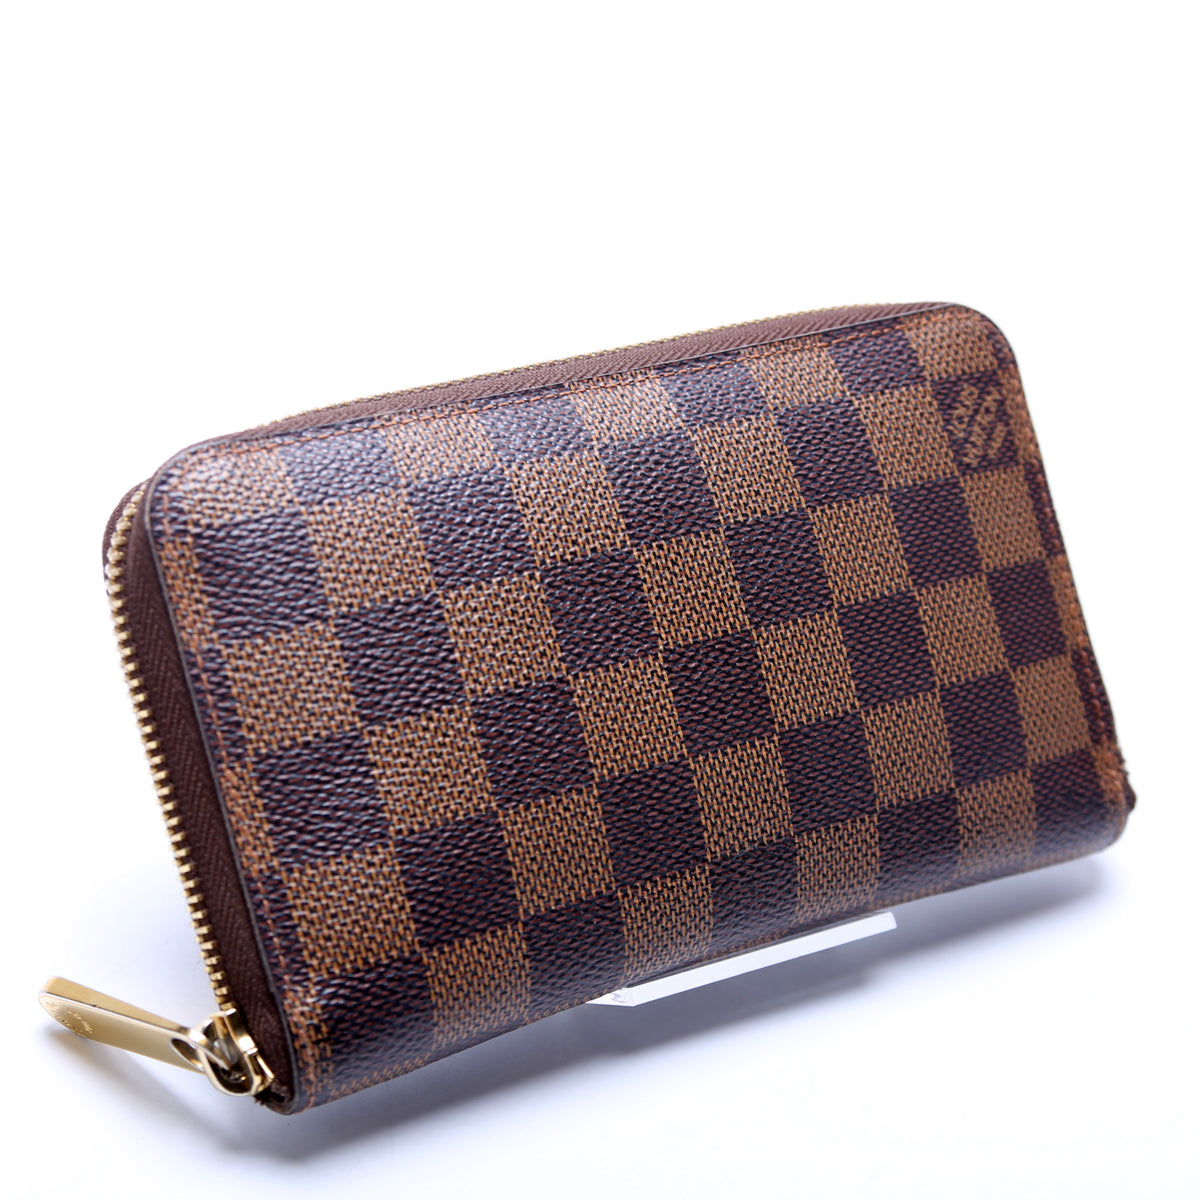 Damier Ebene Zippy Leather Wallet (Authentic Pre-Owned)